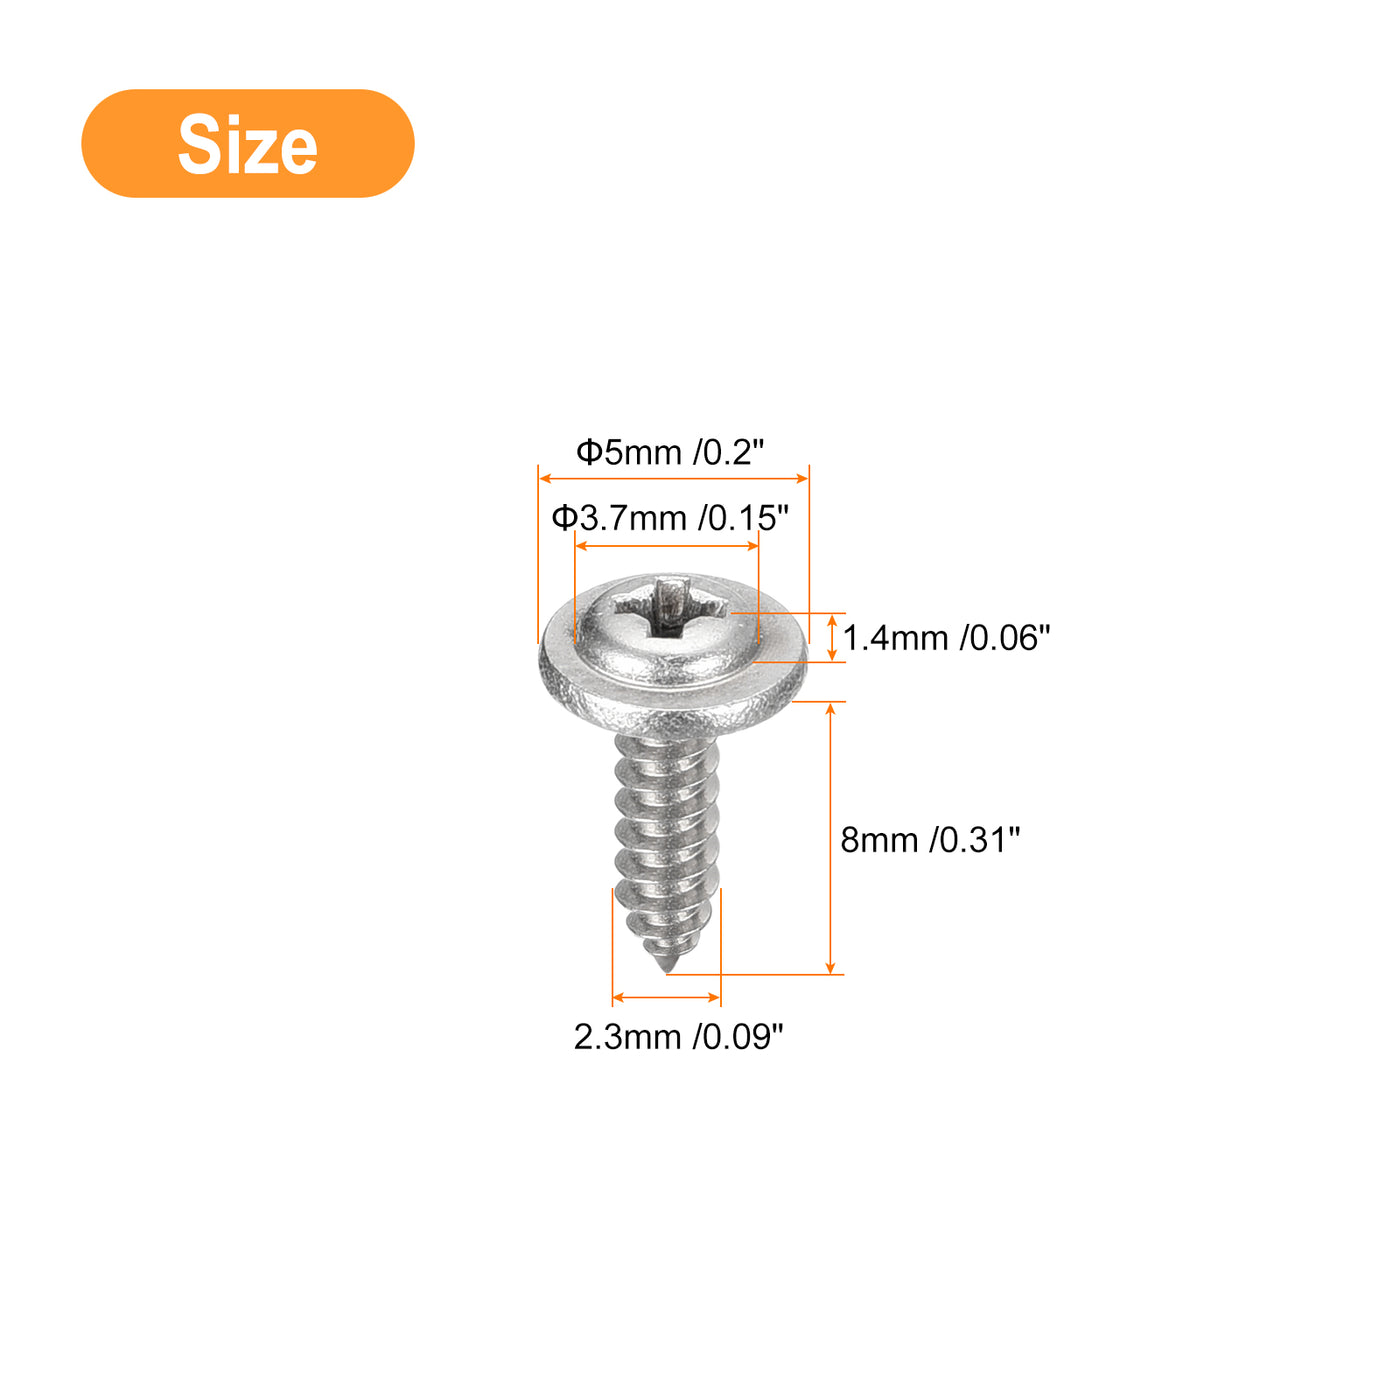 uxcell Uxcell ST2.3x8mm Phillips Pan Head Self-tapping Screw with Washer, 100pcs - 304 Stainless Steel Wood Screw Full Thread (Silver)